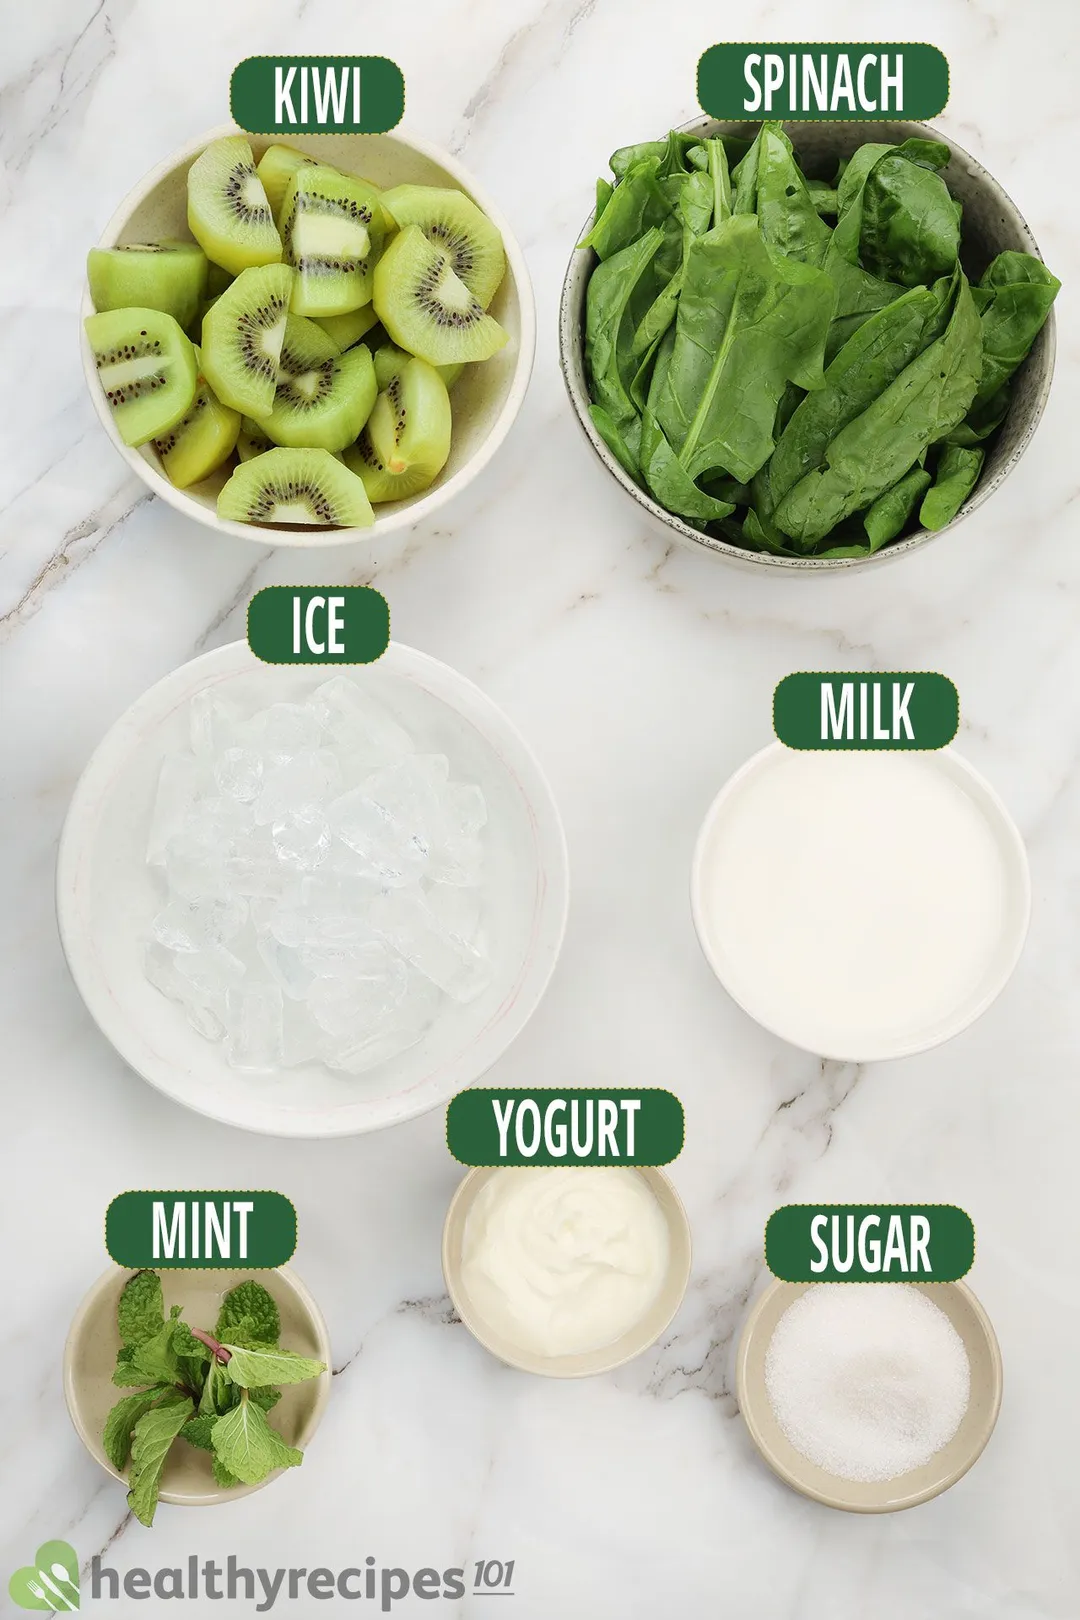 Ingredients for kiwi smoothie, including sliced green kiwi, spinach, mint leaves, and other smoothie essentials.